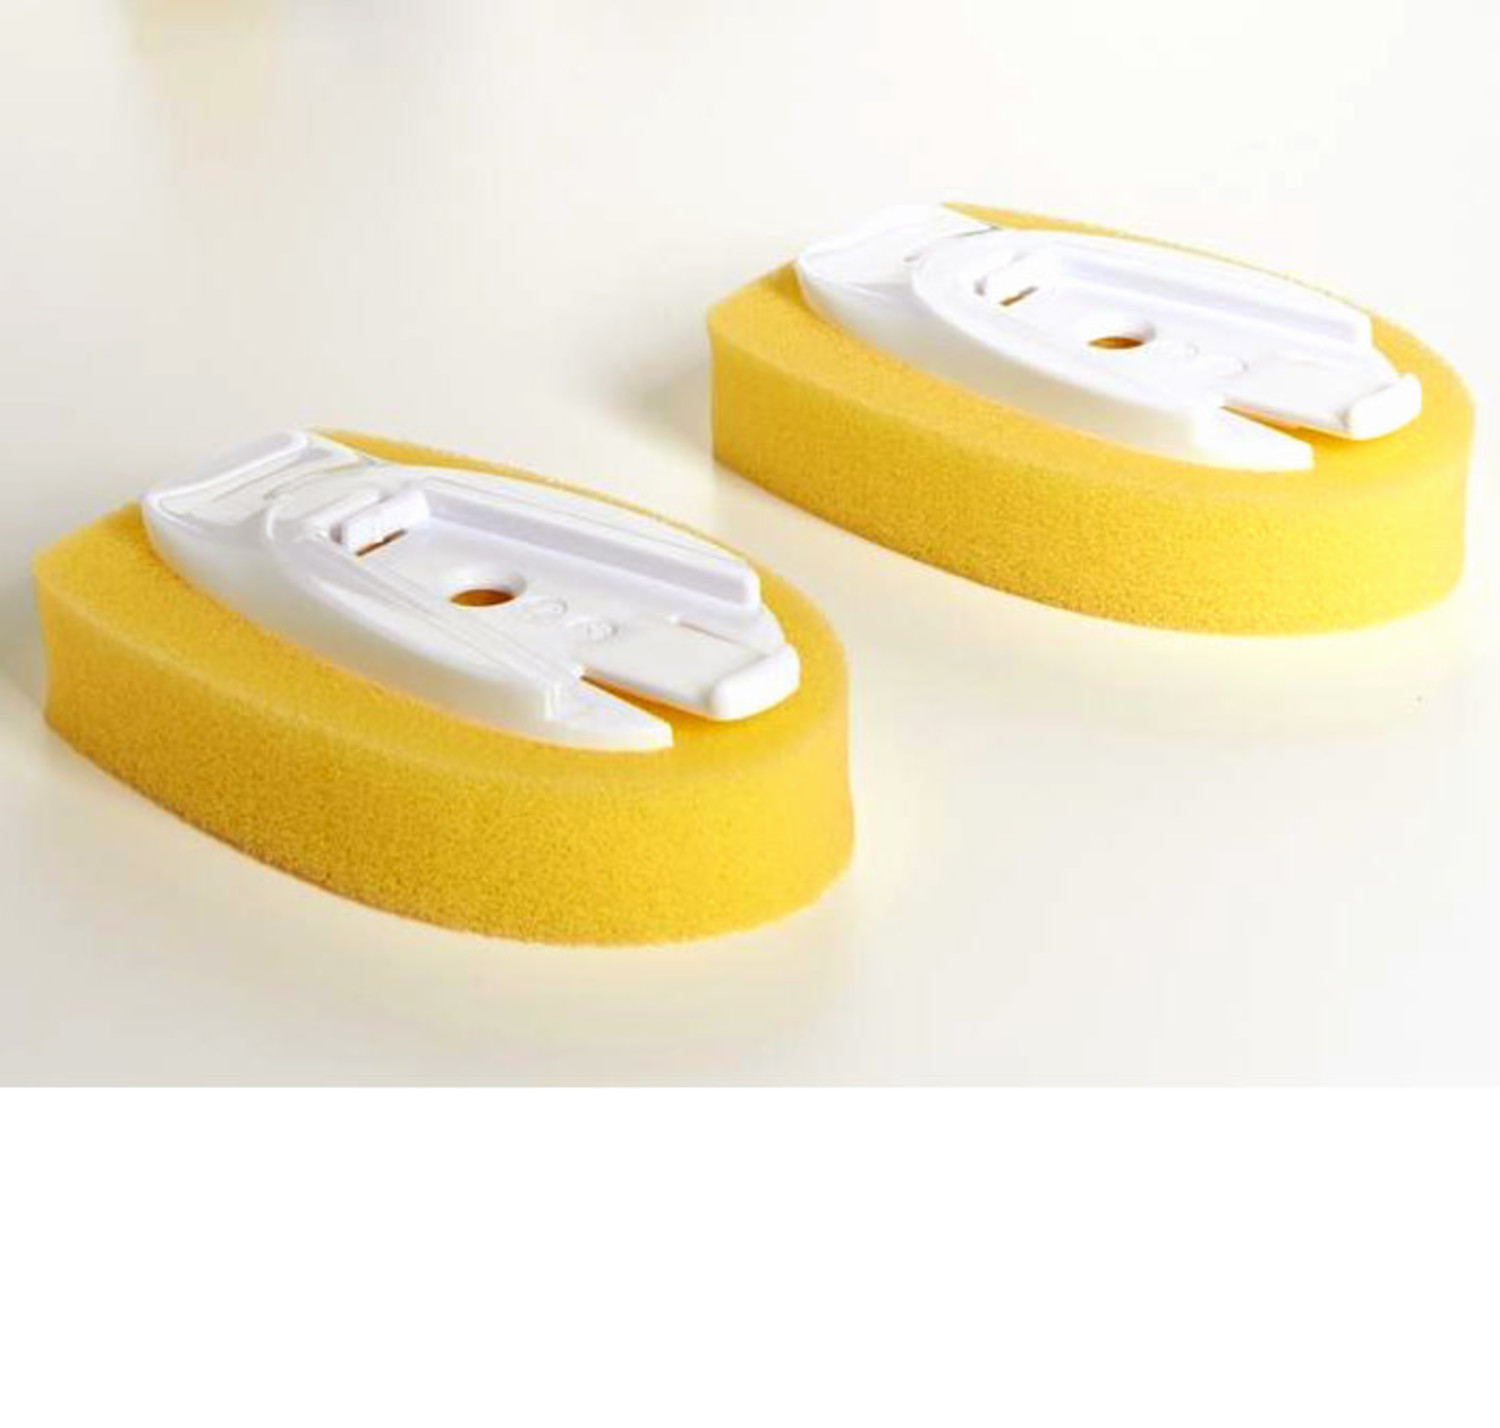 OXO Good Grips Soap Squirting Dish Sponge Refill (Set of 2)